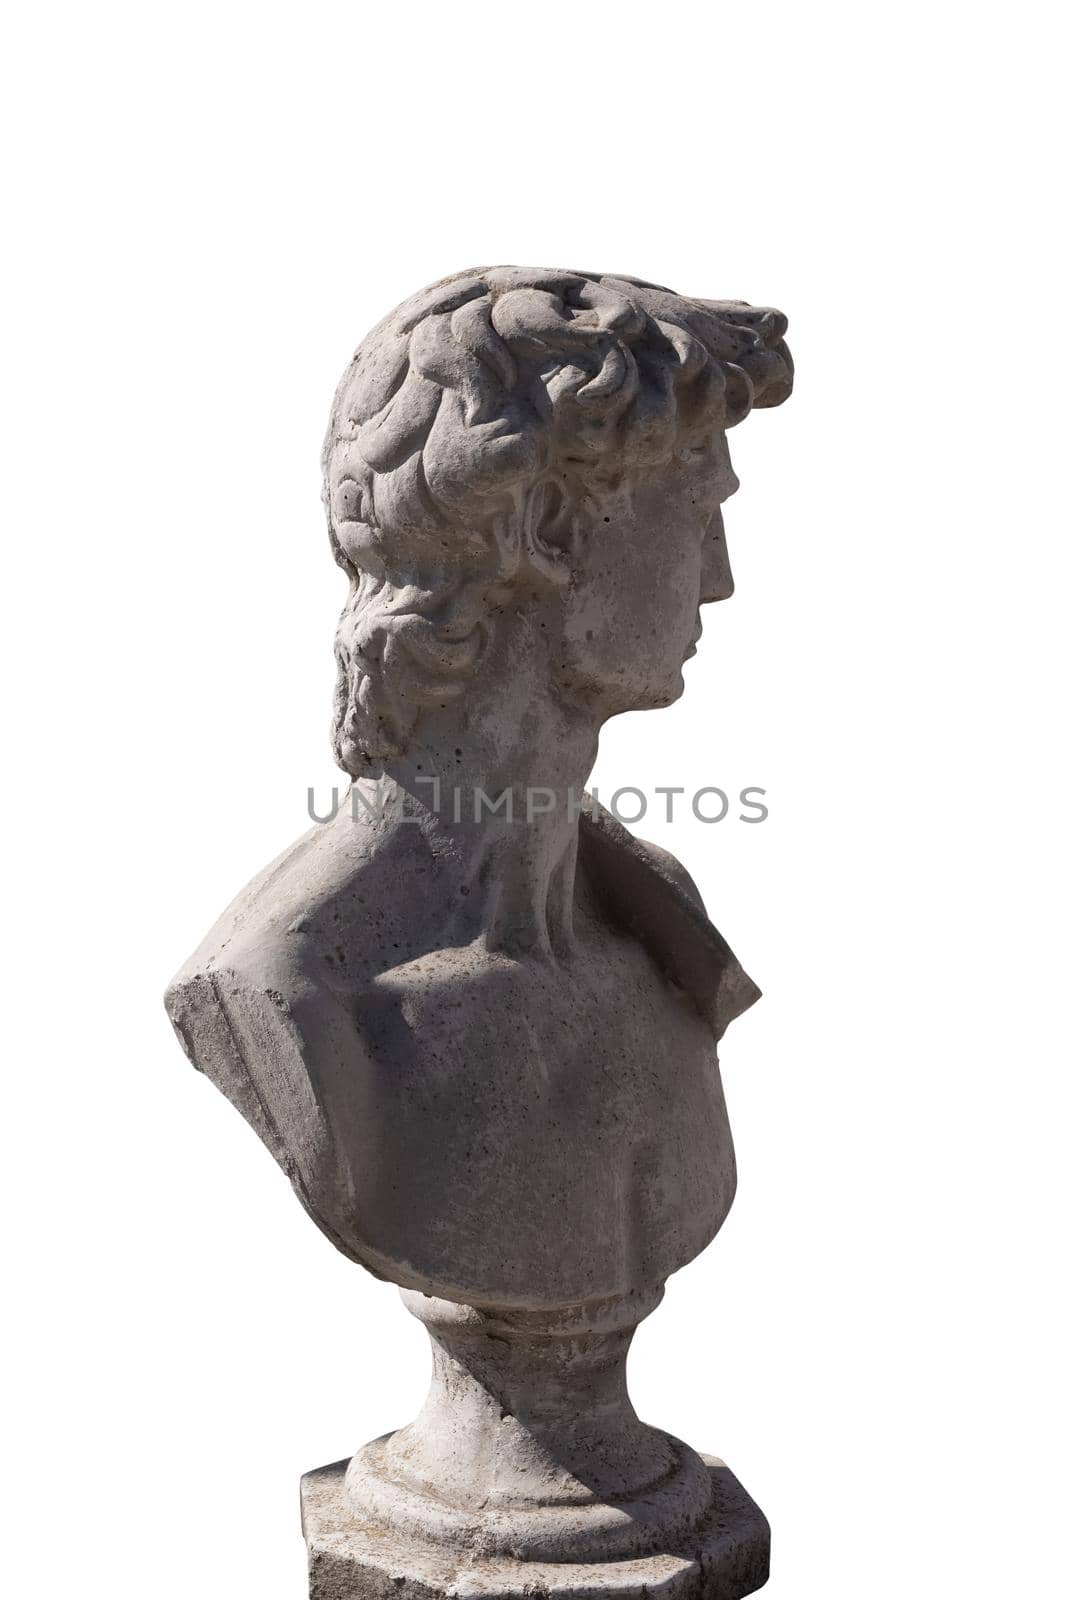 Side view of ancient stone sculpture of man's bust on white background. art and classical style romantic figurative stone sculpture.